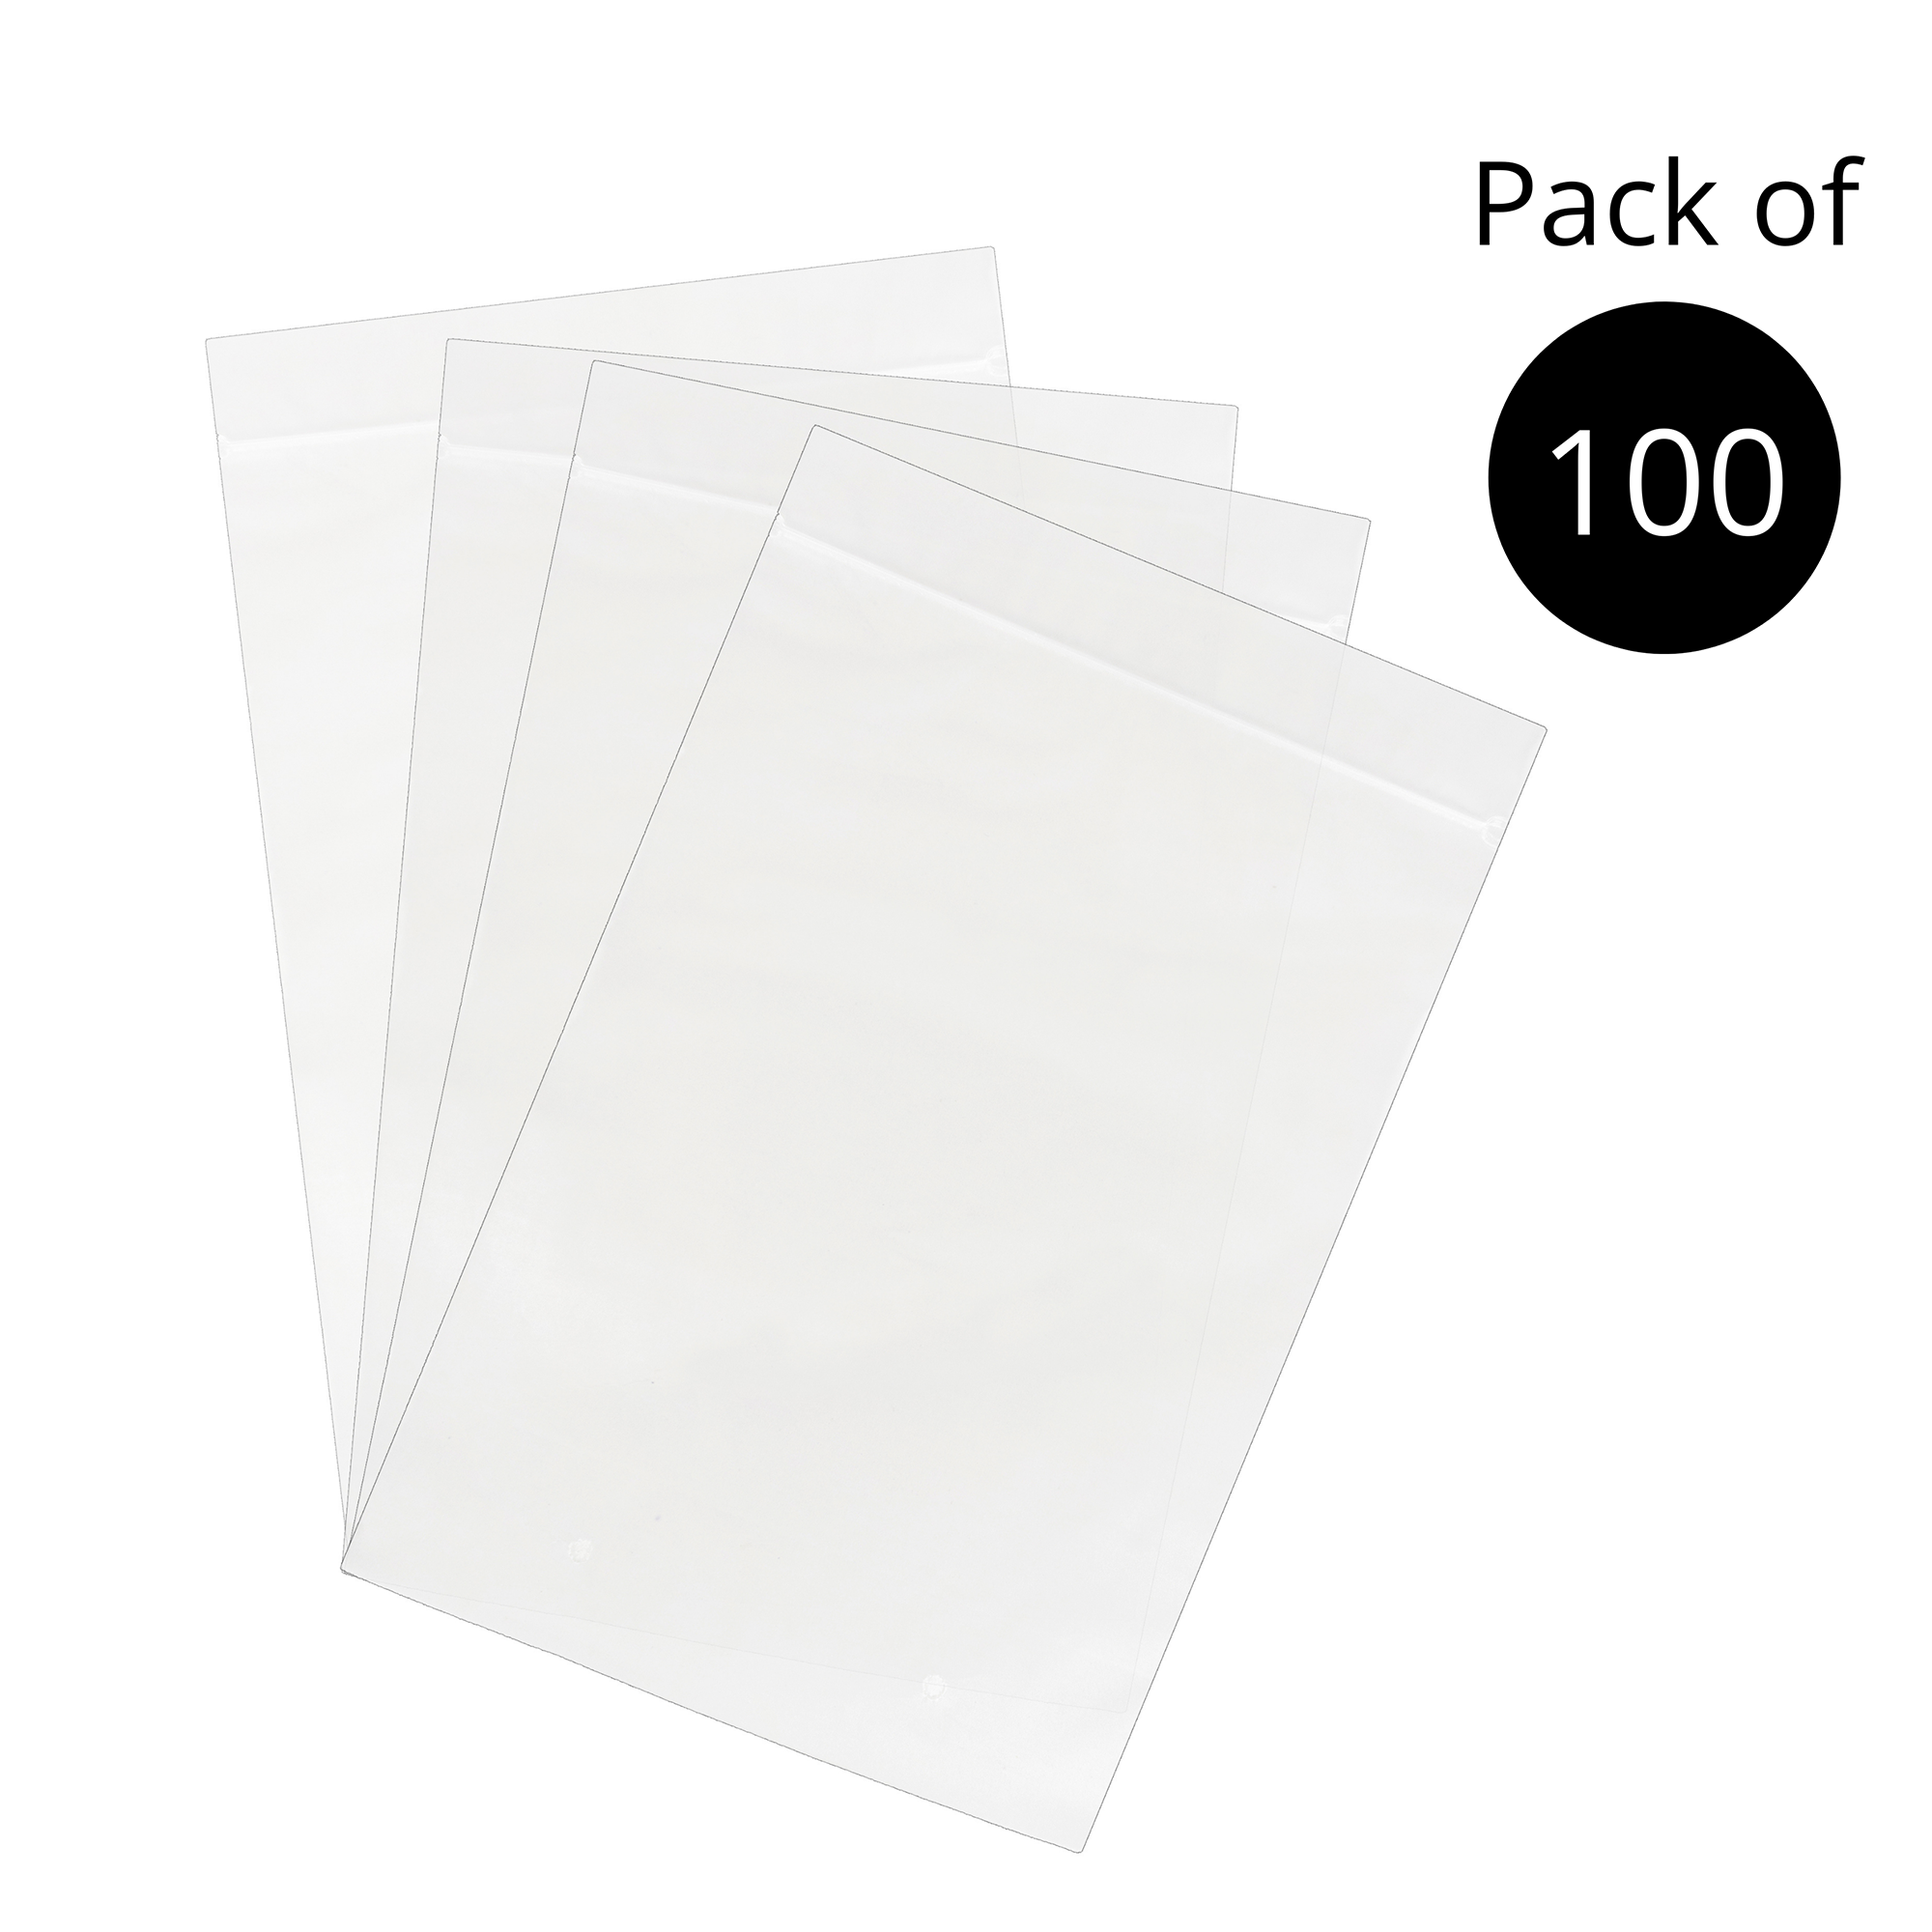 InfinitePack 50 Pack 12x16 inch Reclosable Poly & Plastic Bags for Packaging Clothes, Shirts, Jeans, Pants, T-Shirts, Frosted Zipper Bags with Vent Hole for Travel Storage, 3 Mil - Infinite Pack